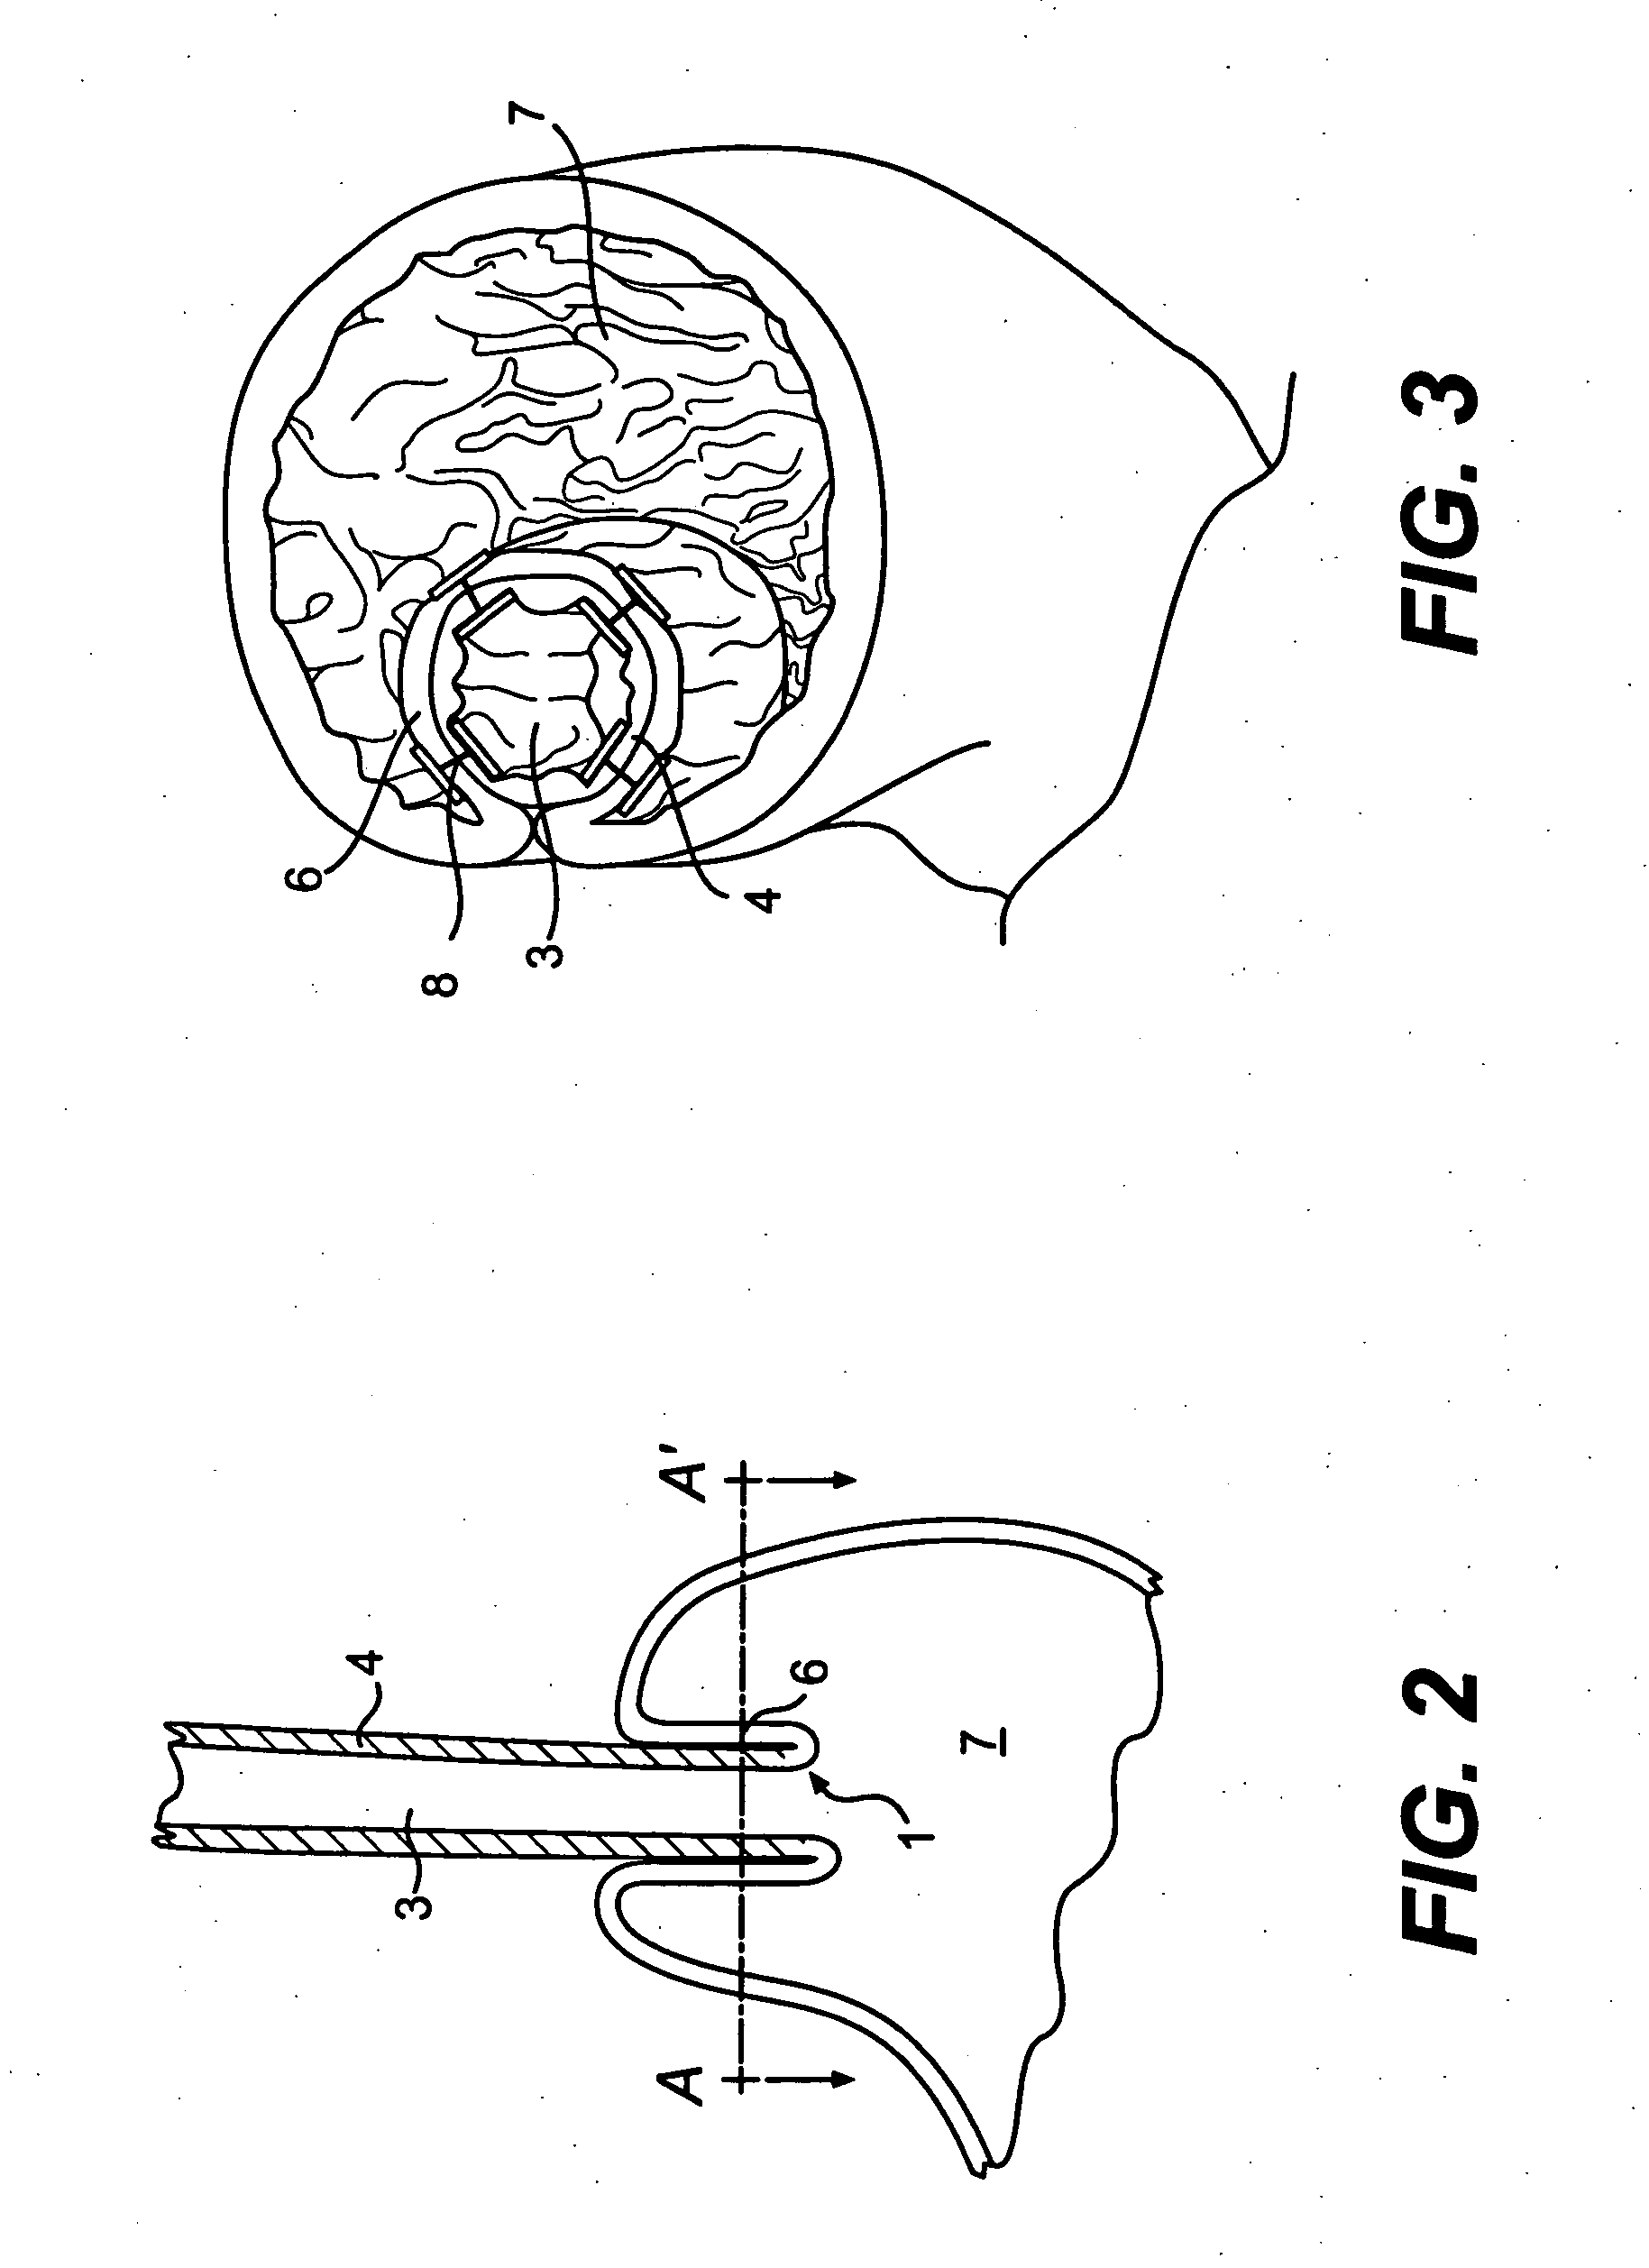 Devices and methods for tissue invagination